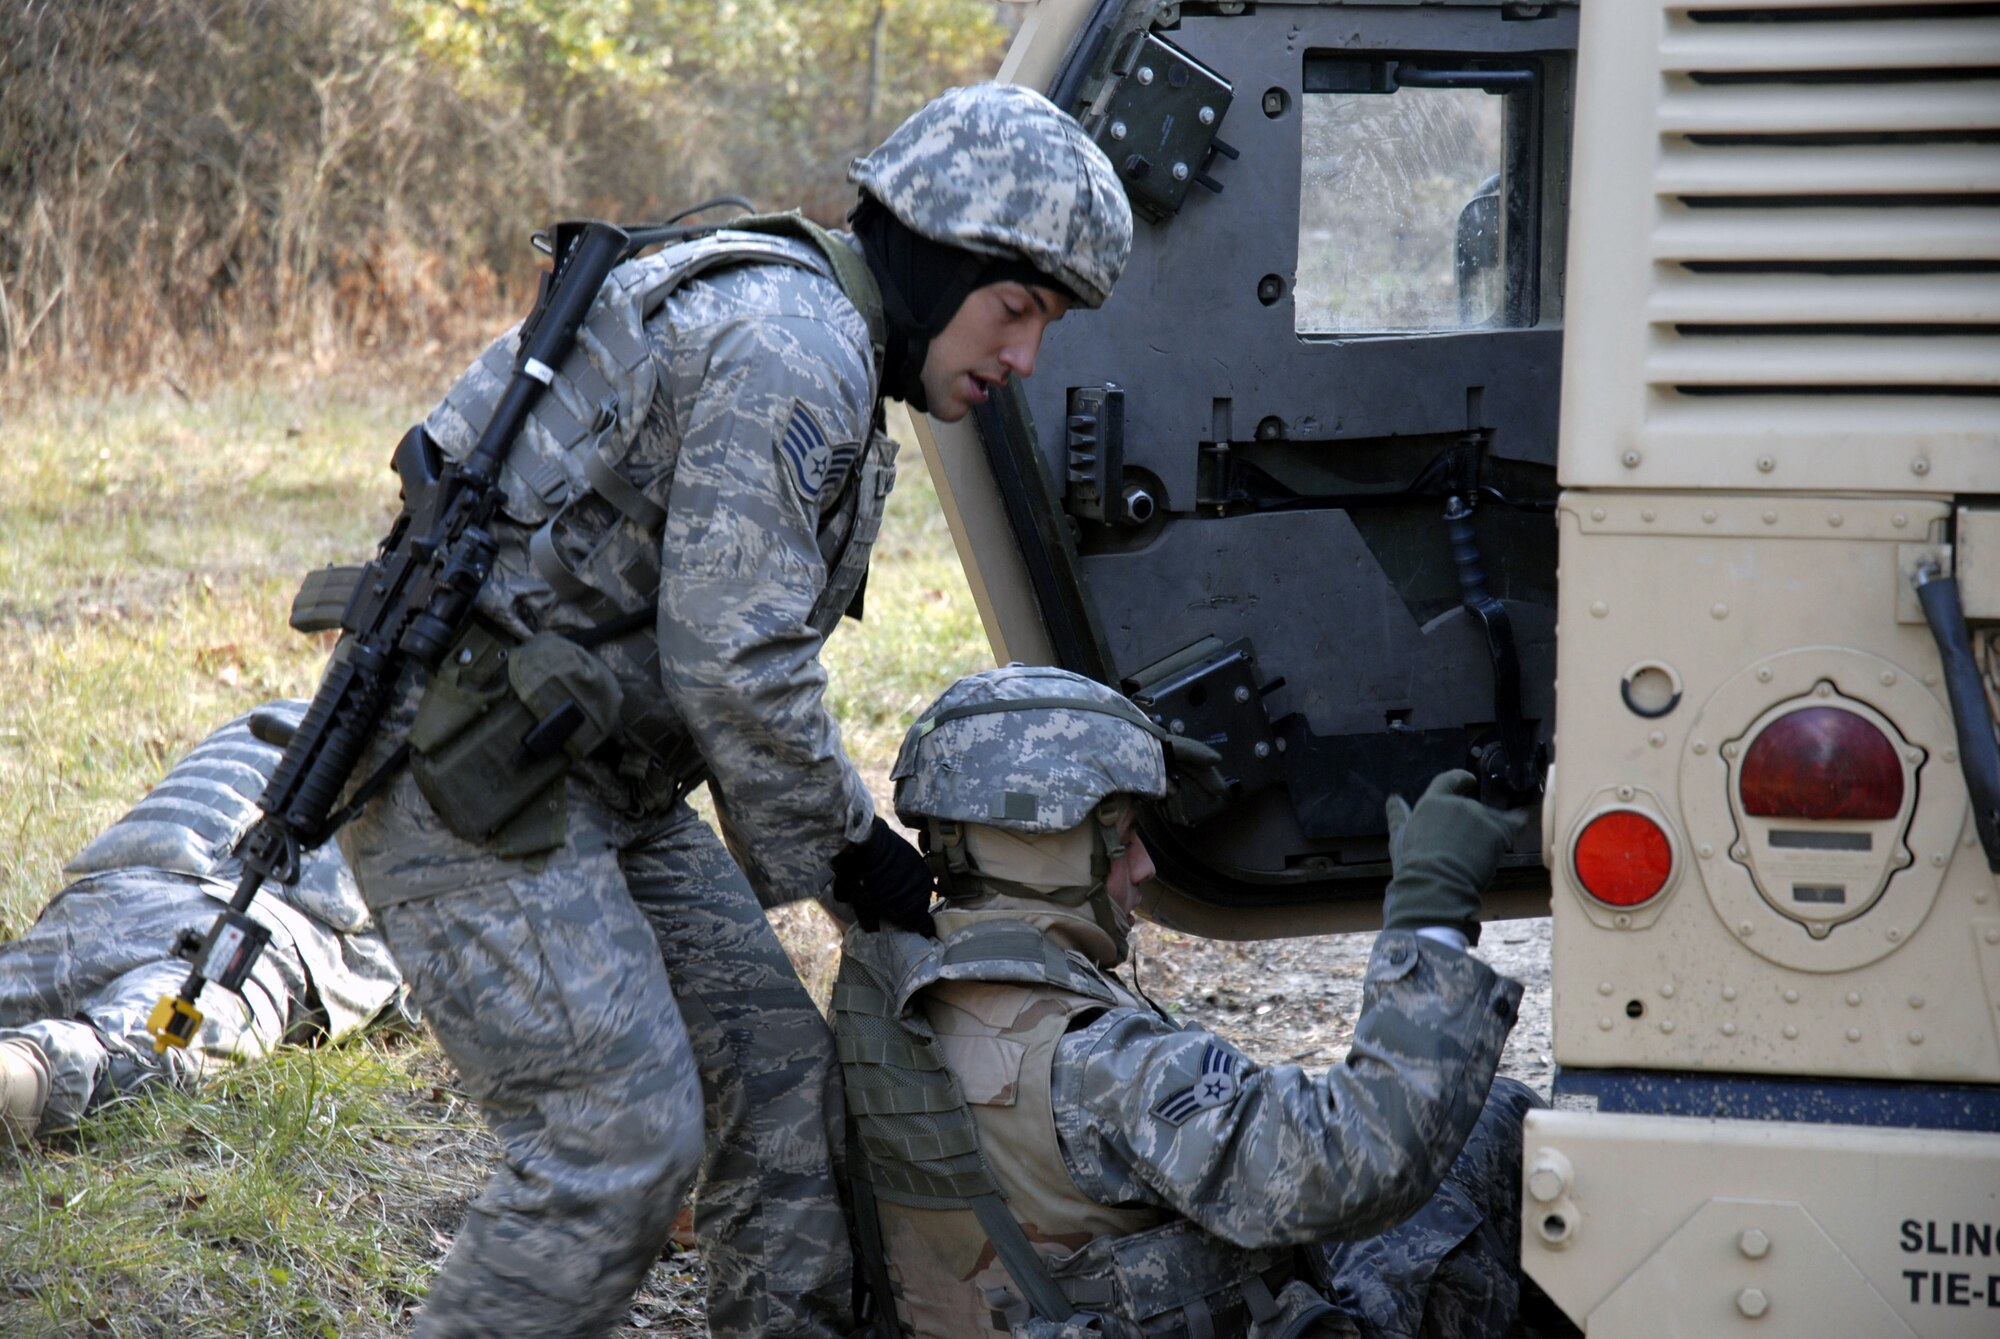 A student in the U.S. Air Force Expeditionary Center's Phoenix Warrior Training Course moves an "injured Airman" while taking cover during a scenario for convoy operations training in the course Dec. 5, 2008, on a Fort Dix, N.J., range.  The course is taught by the Center's 421st Combat Training Squadron and prepares security forces Airmen for upcoming deployments. (U.S. Air Force Photo/Staff Sgt. Paul R. Evans)